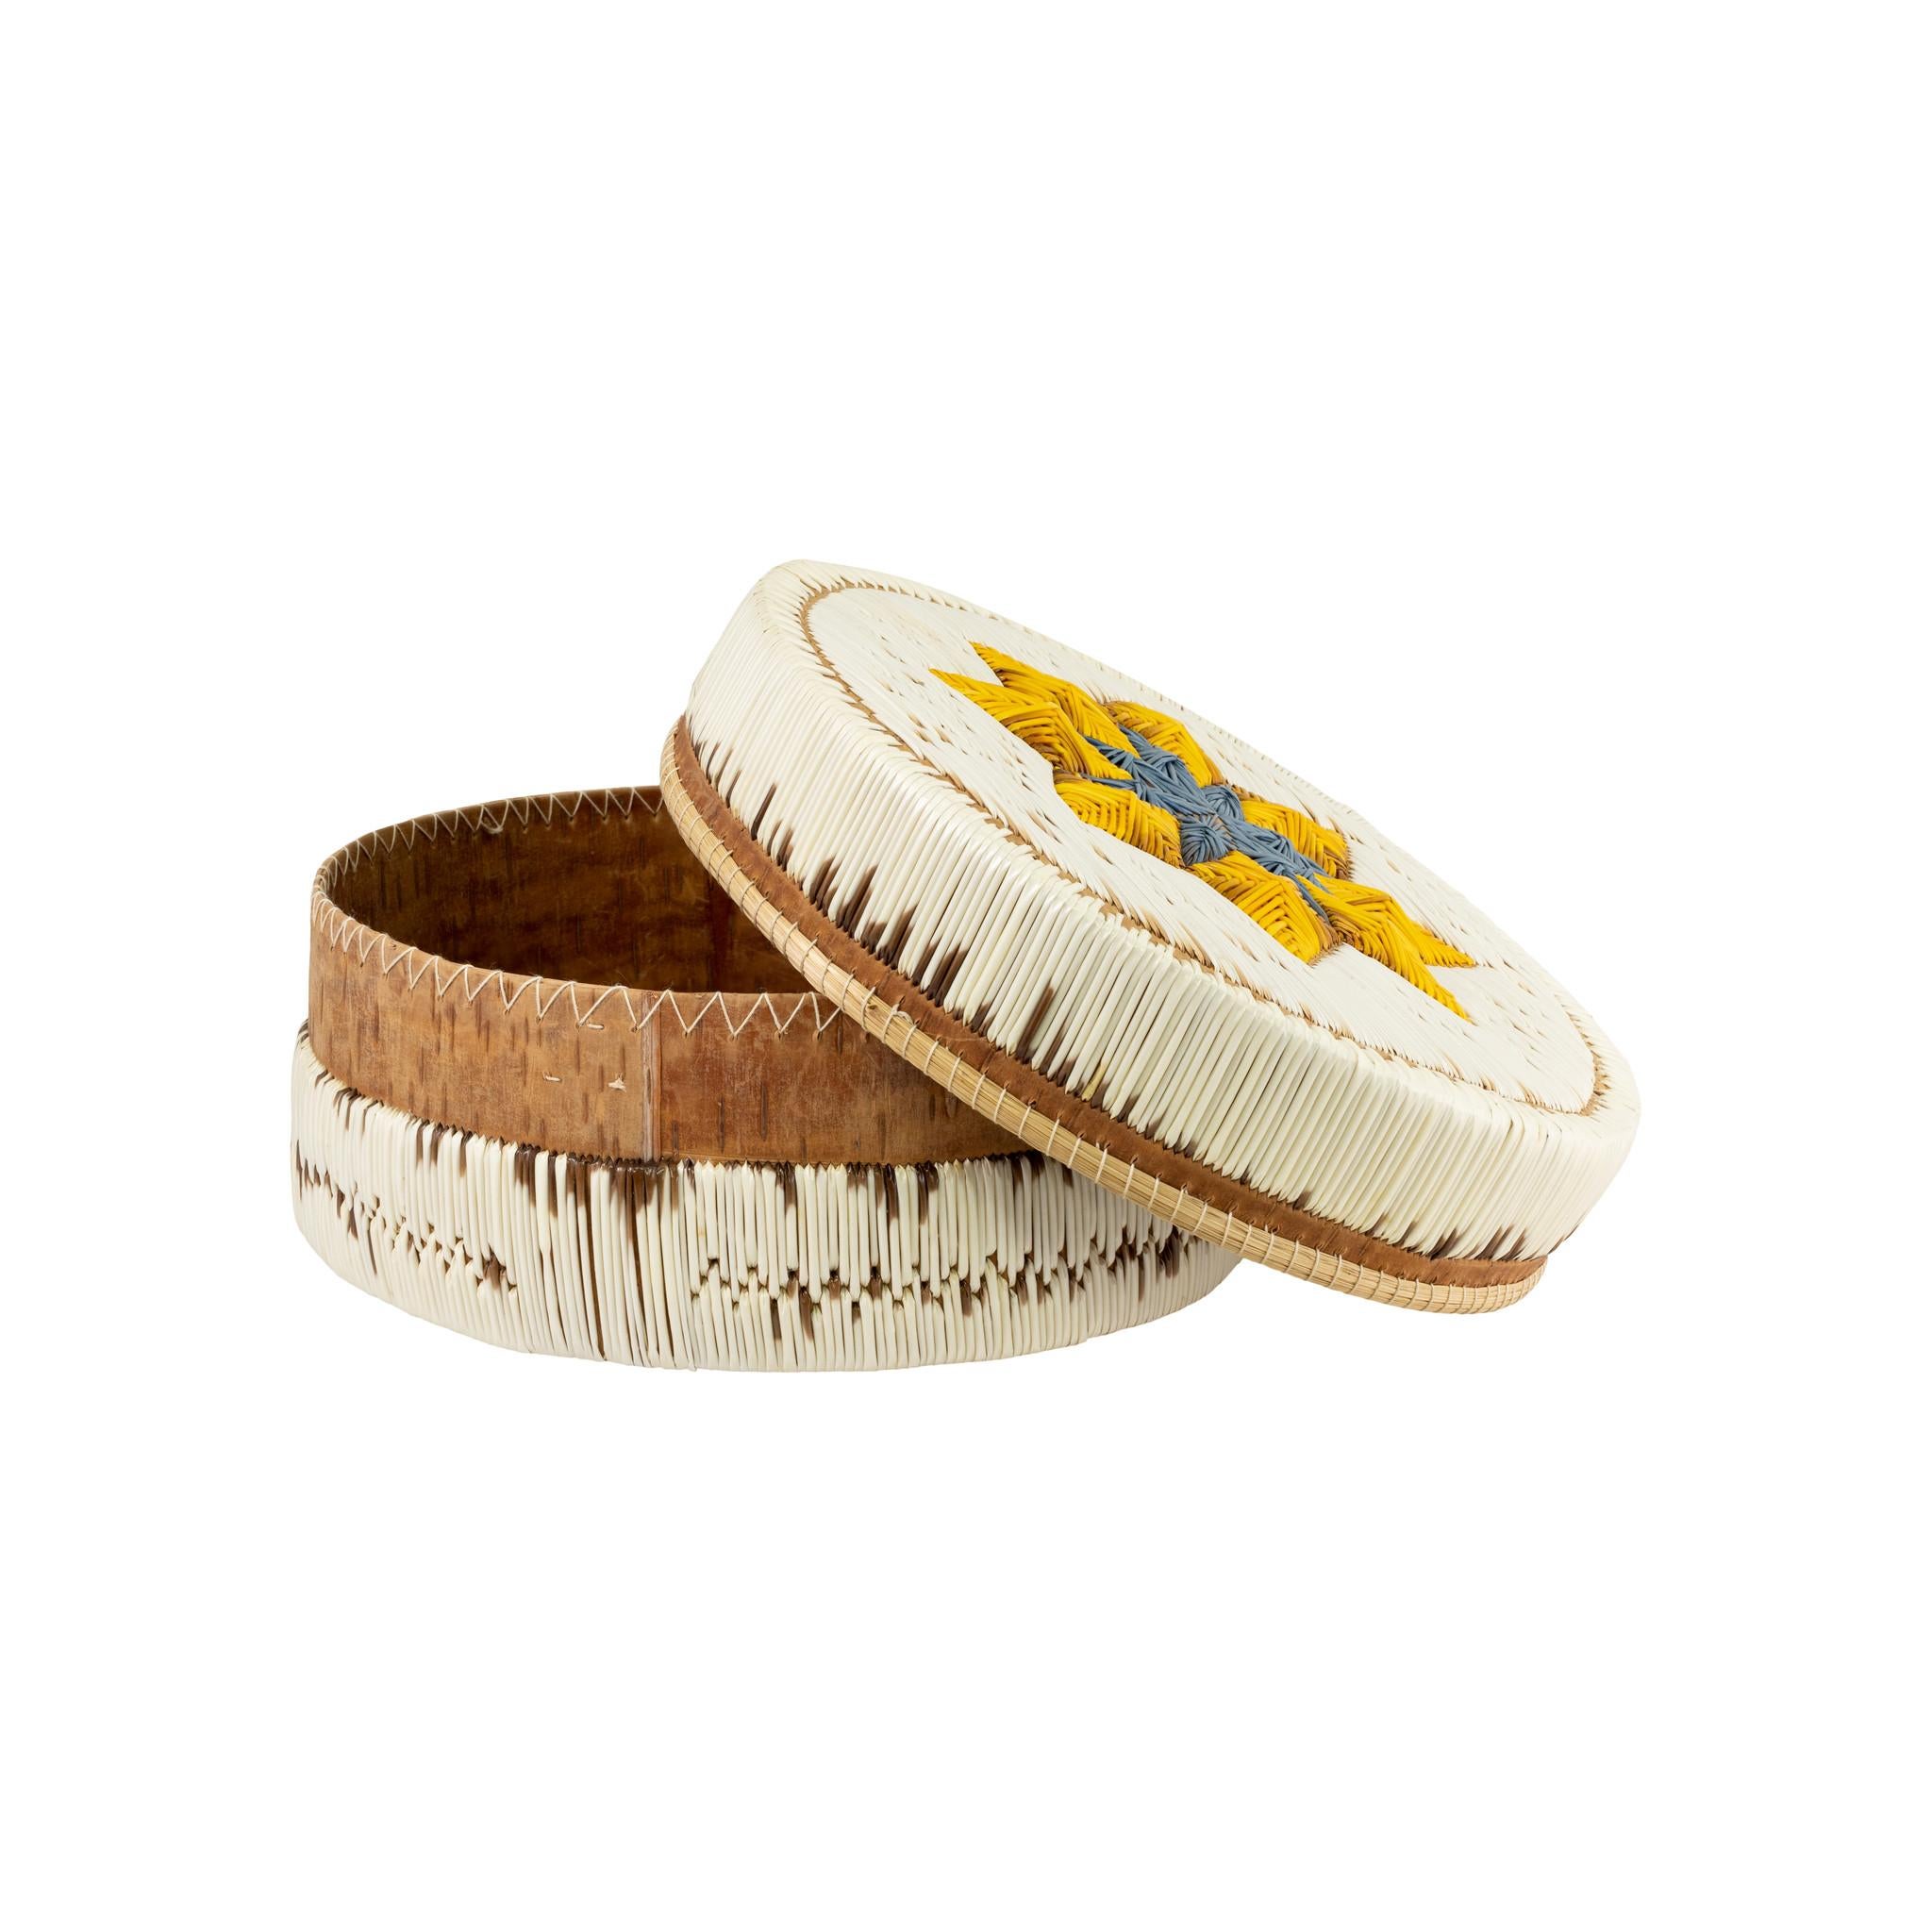 Chippewa circular quilled birch bark box with fully quilled lid with three dimensional yellow star. Birch bark, quills and sweet grass.

Period: Mid-20th century
Origin: Chippewa/Minnesota
Size: 8